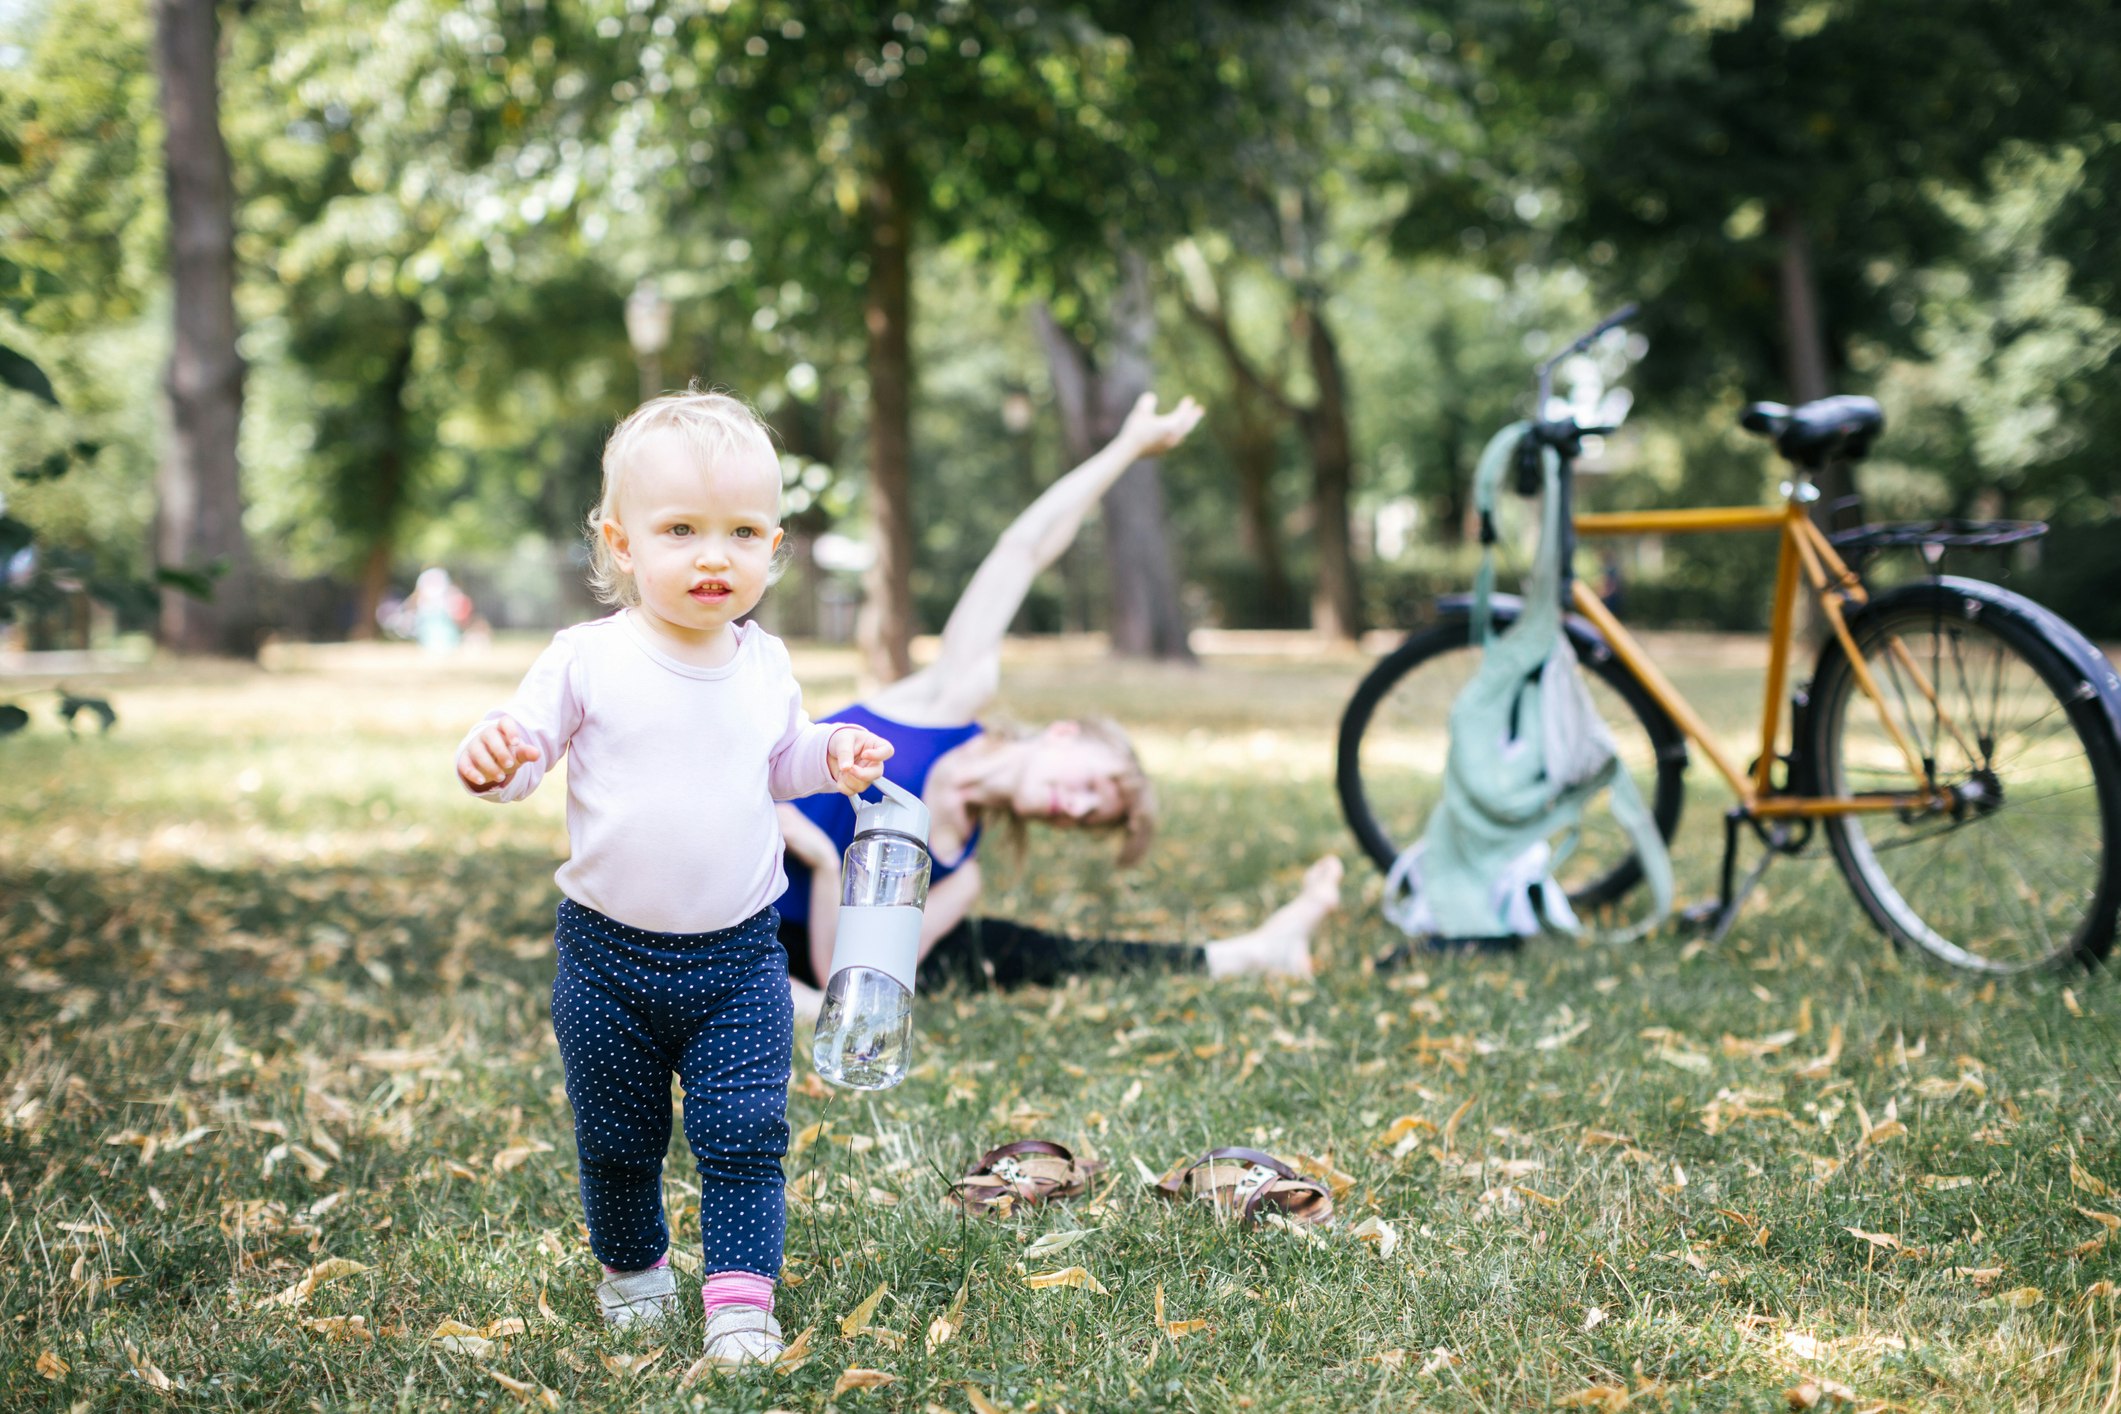 A tow-headed baby runs through a park with a reusable water bottle while her mother does yoga in the background in a purple top and black leggings. A yellow bicycle is parked nearby with a green bag hanging from the handlebars.